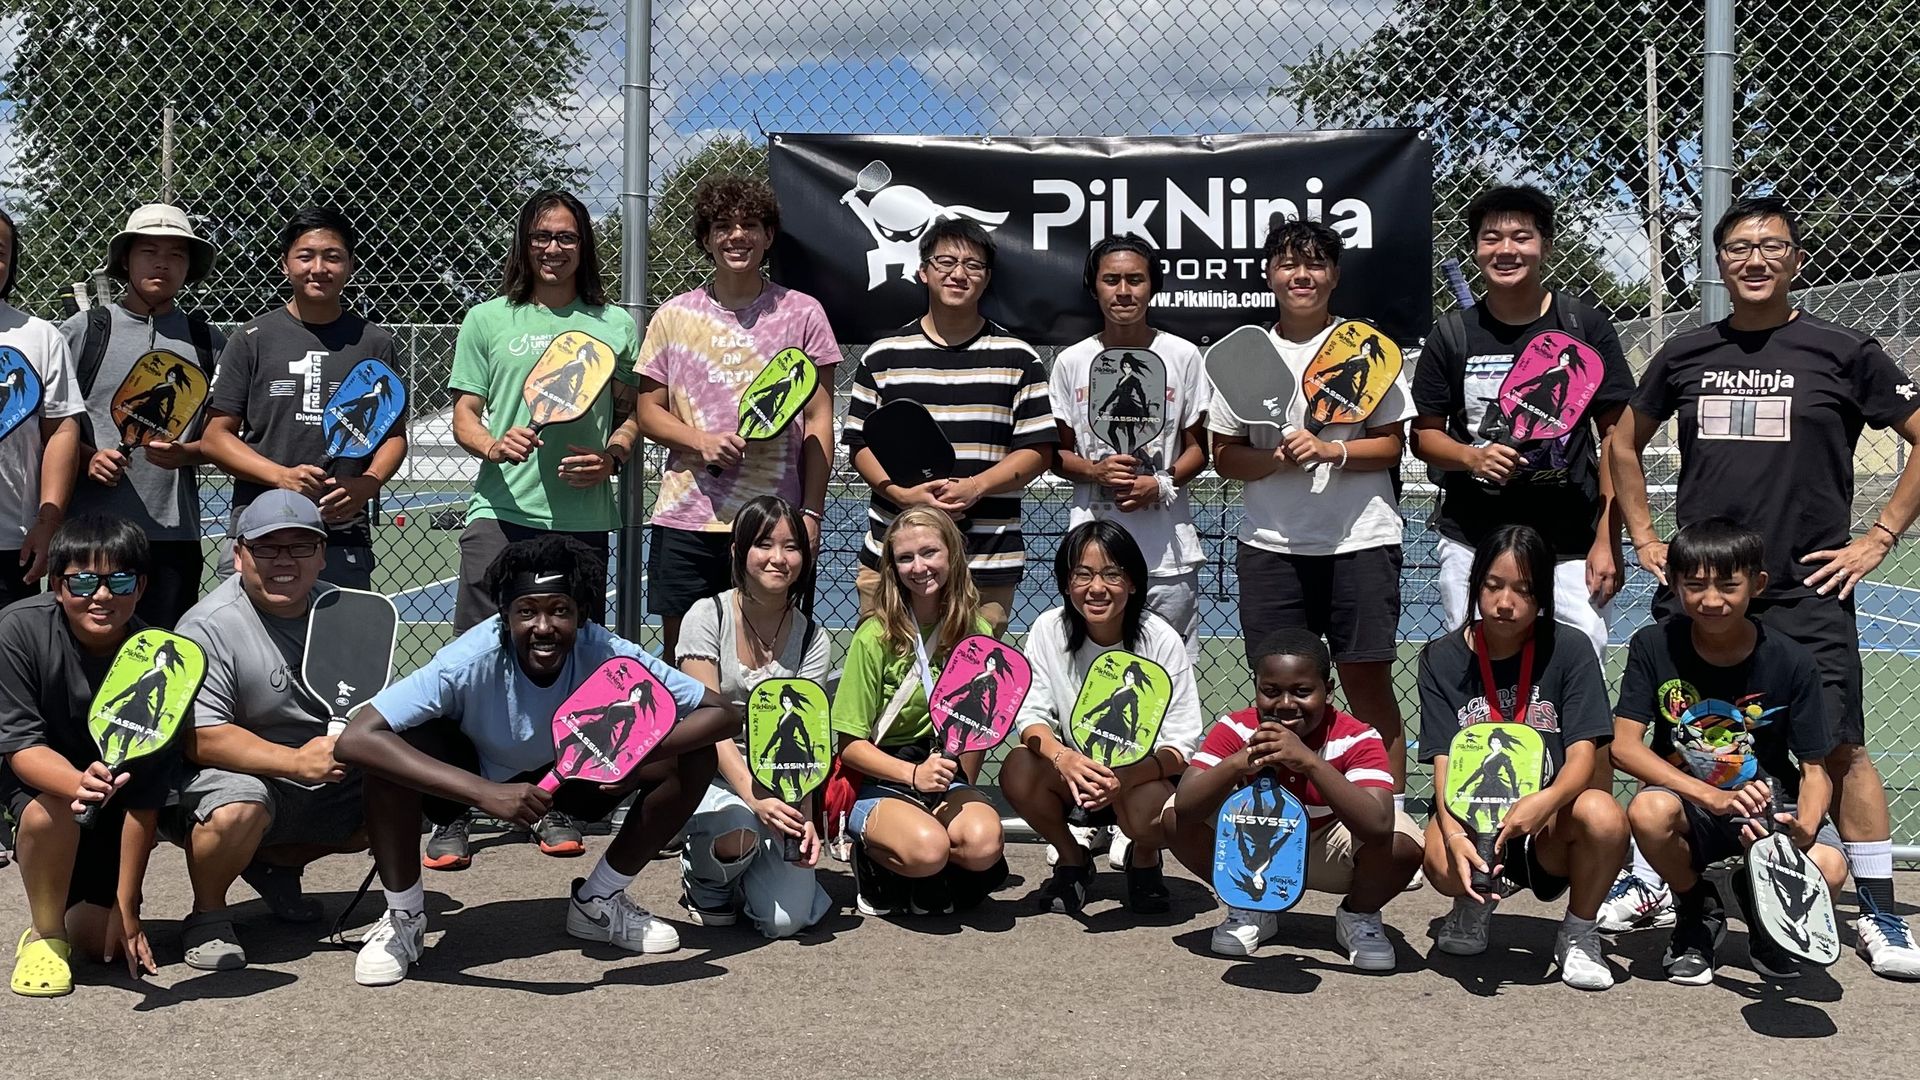 a group of young people in athletic clothes holding bright green pink and blue paddle balls in front of a court